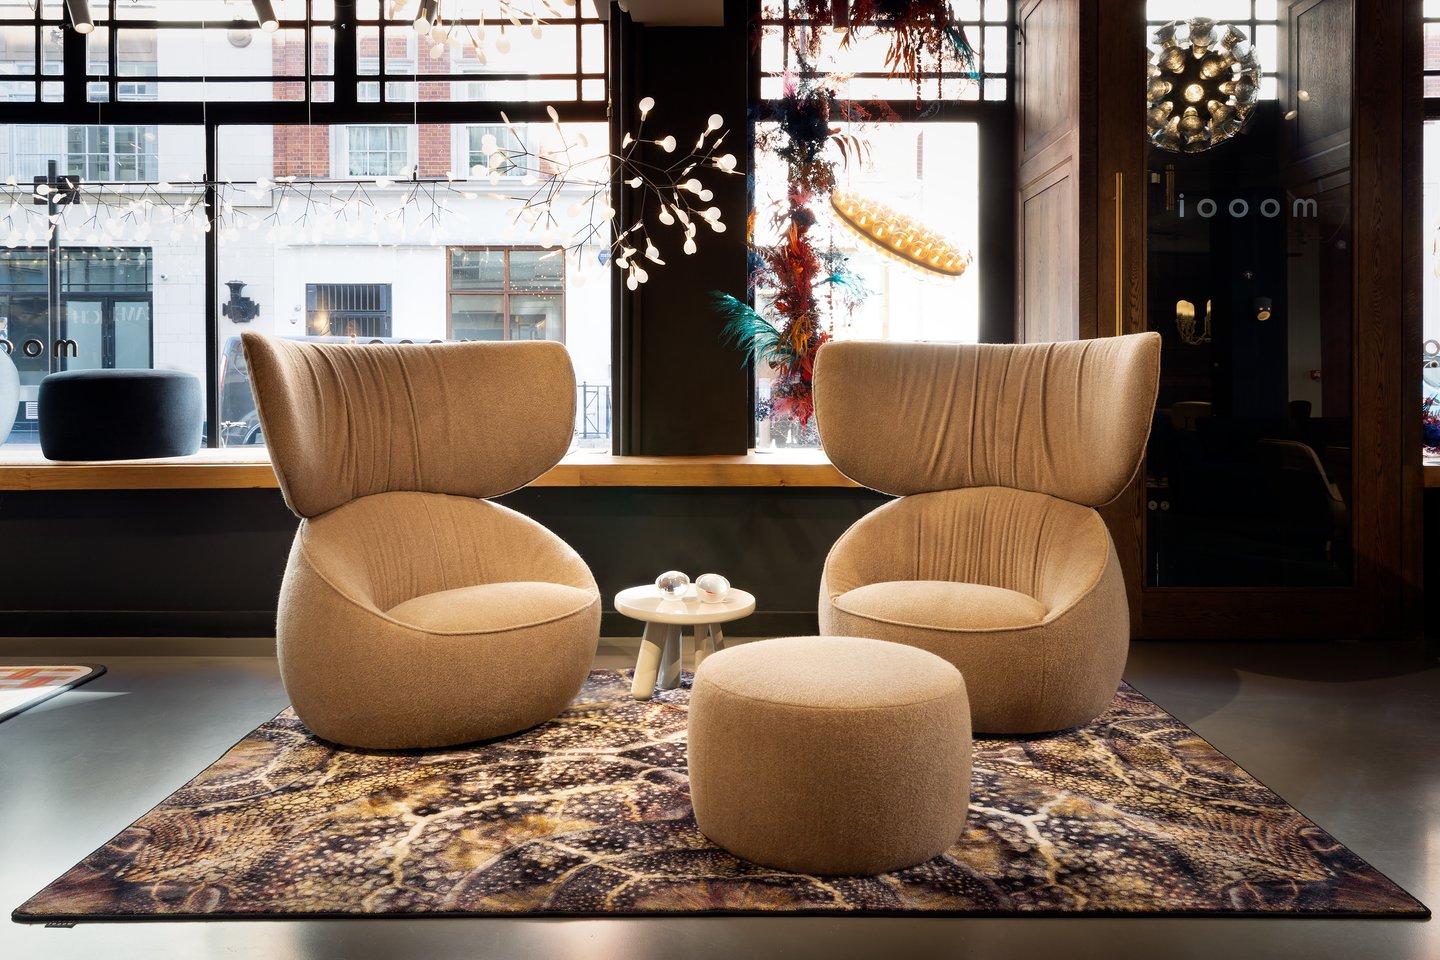 Moooi Pooof Large Pouf in Divina MD, 683 Purple Upholstery In New Condition For Sale In Brooklyn, NY